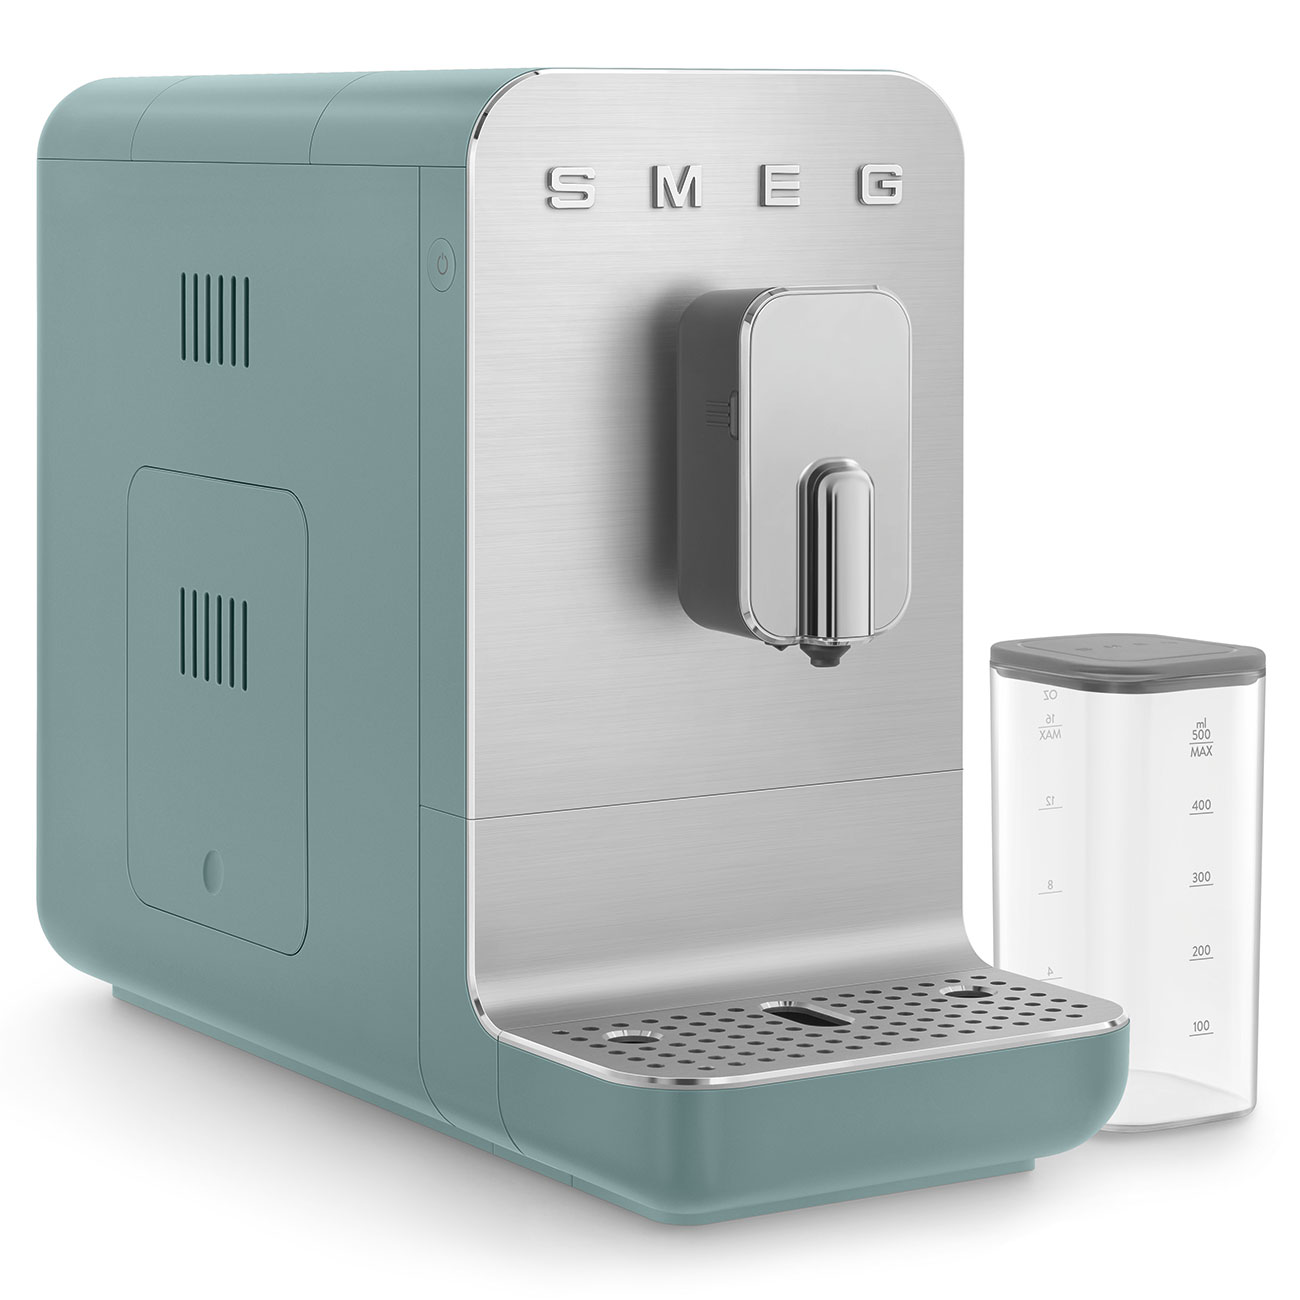 Smeg Emerald Green Bean To Cup Coffee Machine with integrated milk tank_6